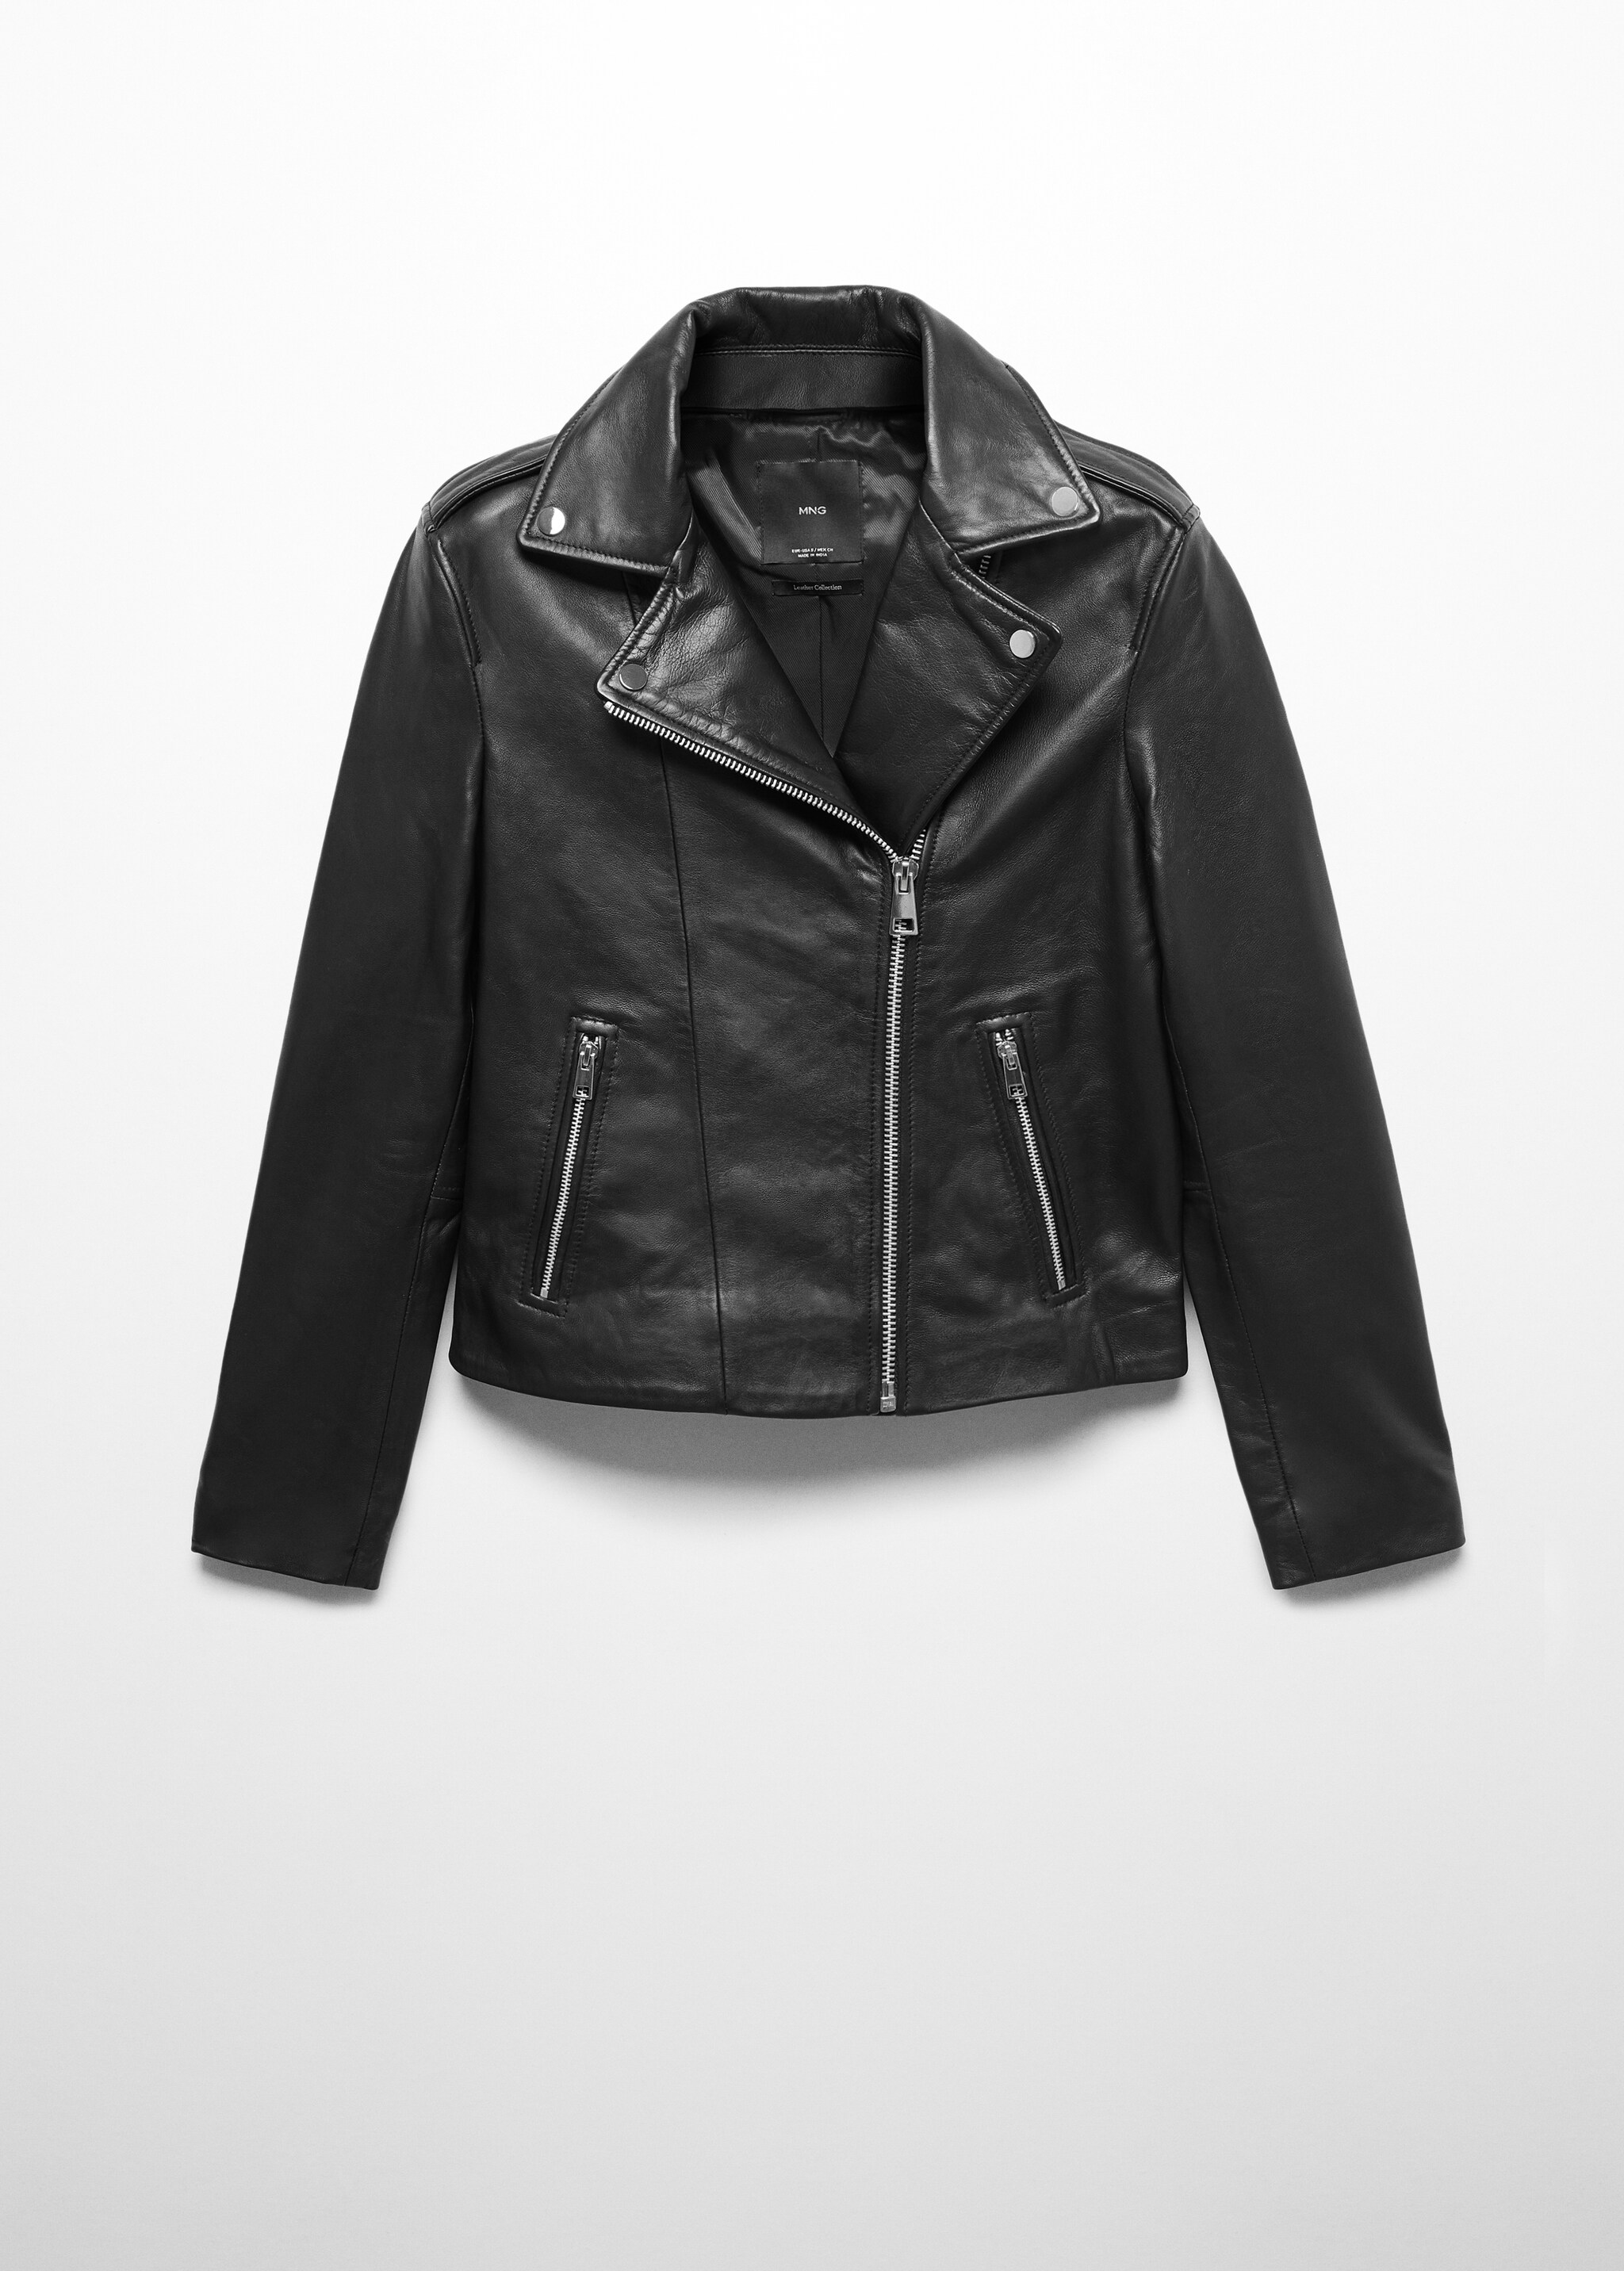 Leather biker jacket - Article without model